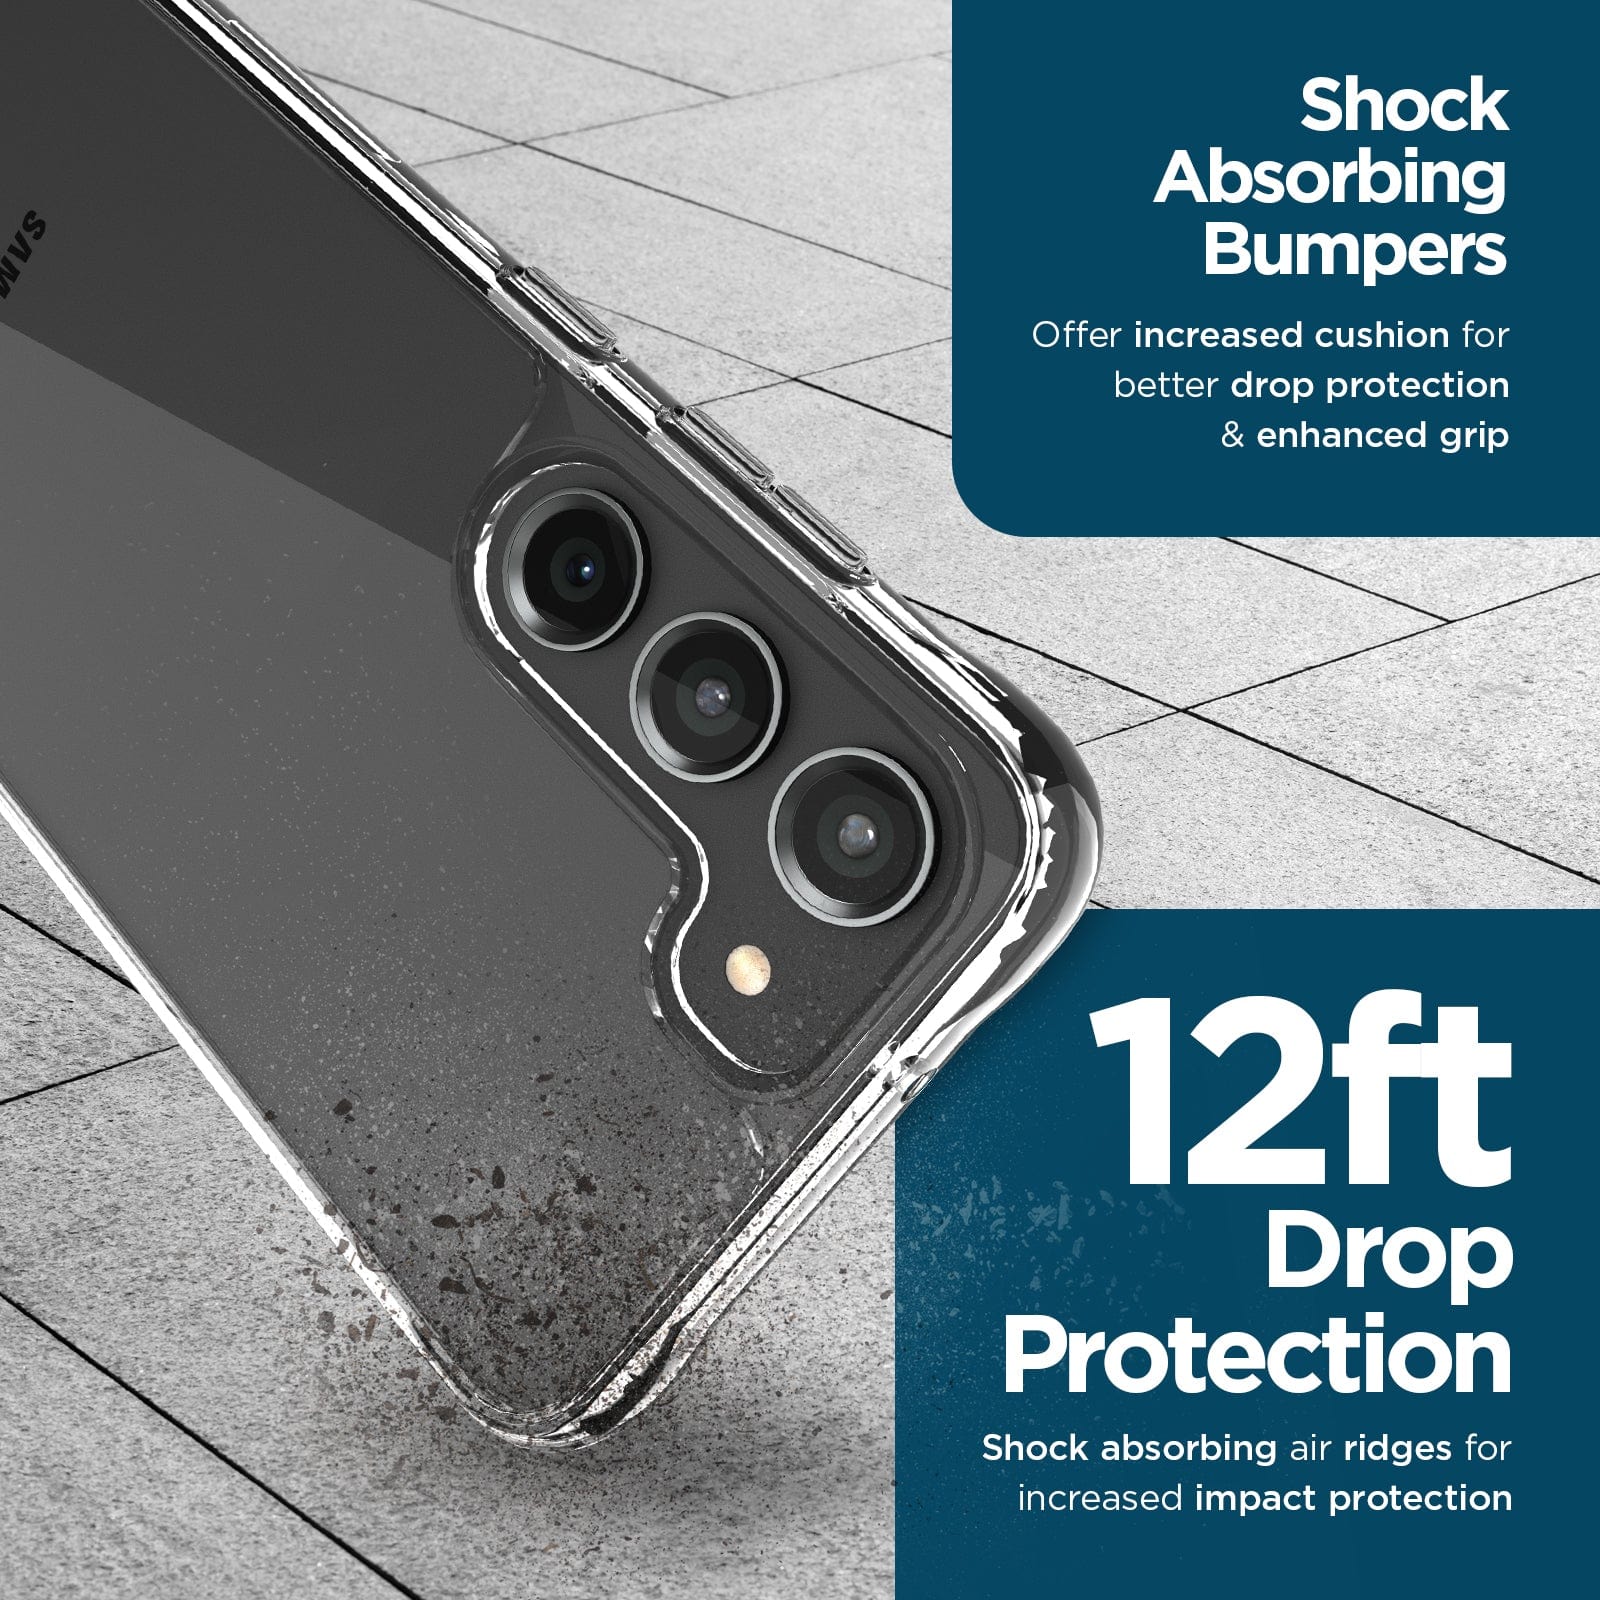 SHOCK ABSORBING BUMPERS. OFFER INCREASED CUSHION FOR BETTER DROP PROTECTION & ENHANCED GRIP. 12FT DROP PROTECTION. SHOCK ABSORBING AIR RIDGES FOR INCREASED IMPACT PROTECTION.